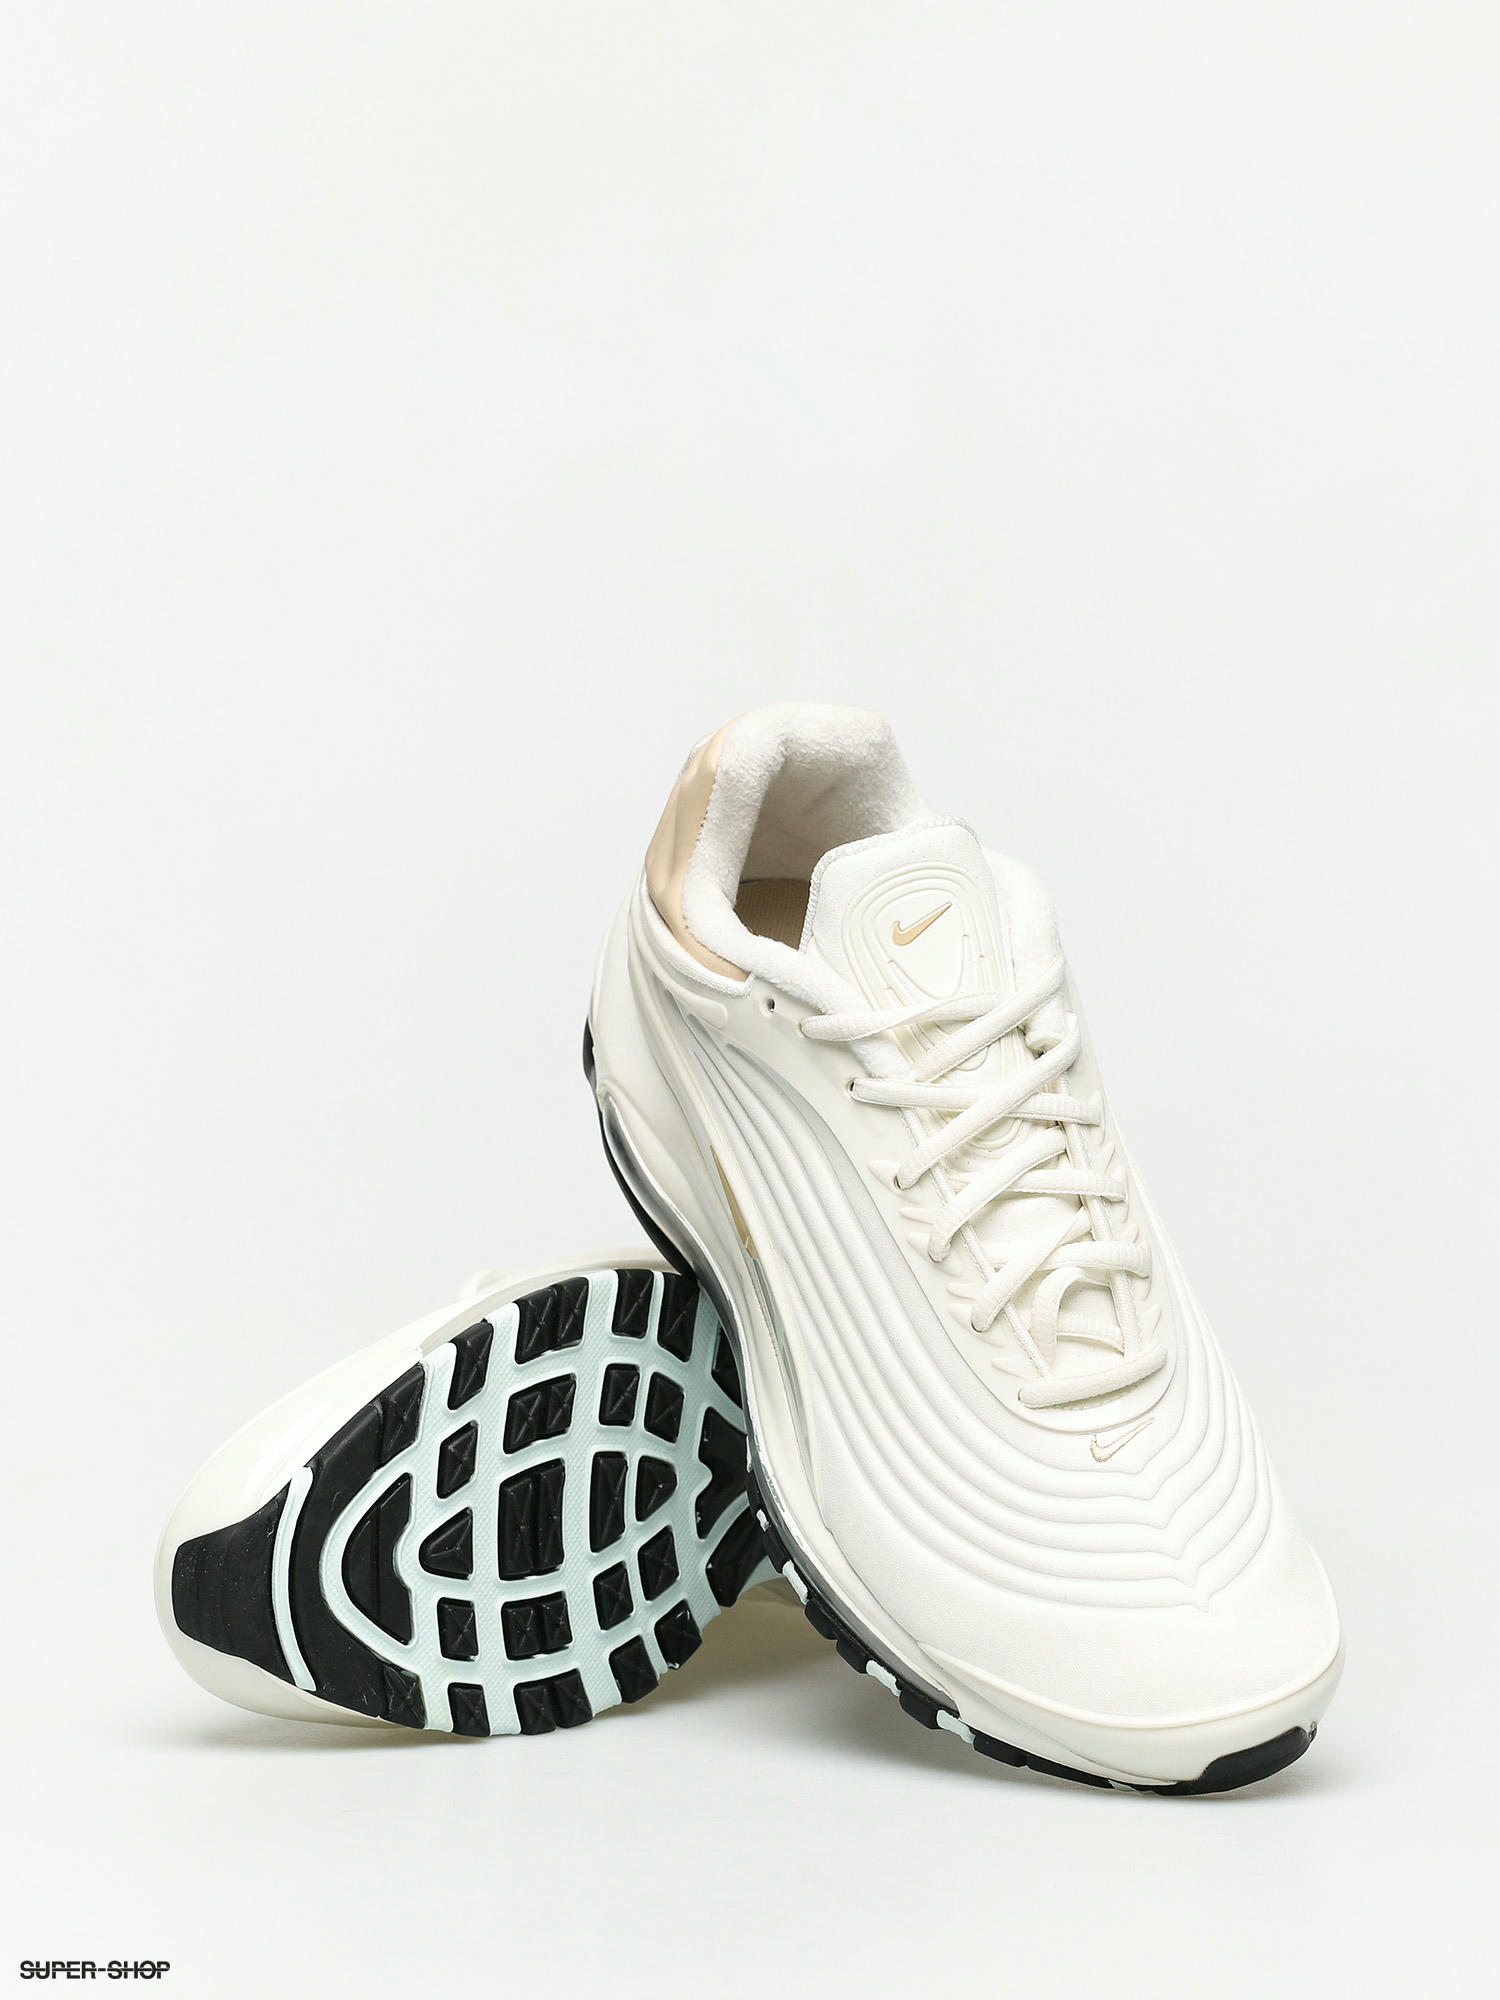 Nike Air Max Deluxe Se Shoes (sail 